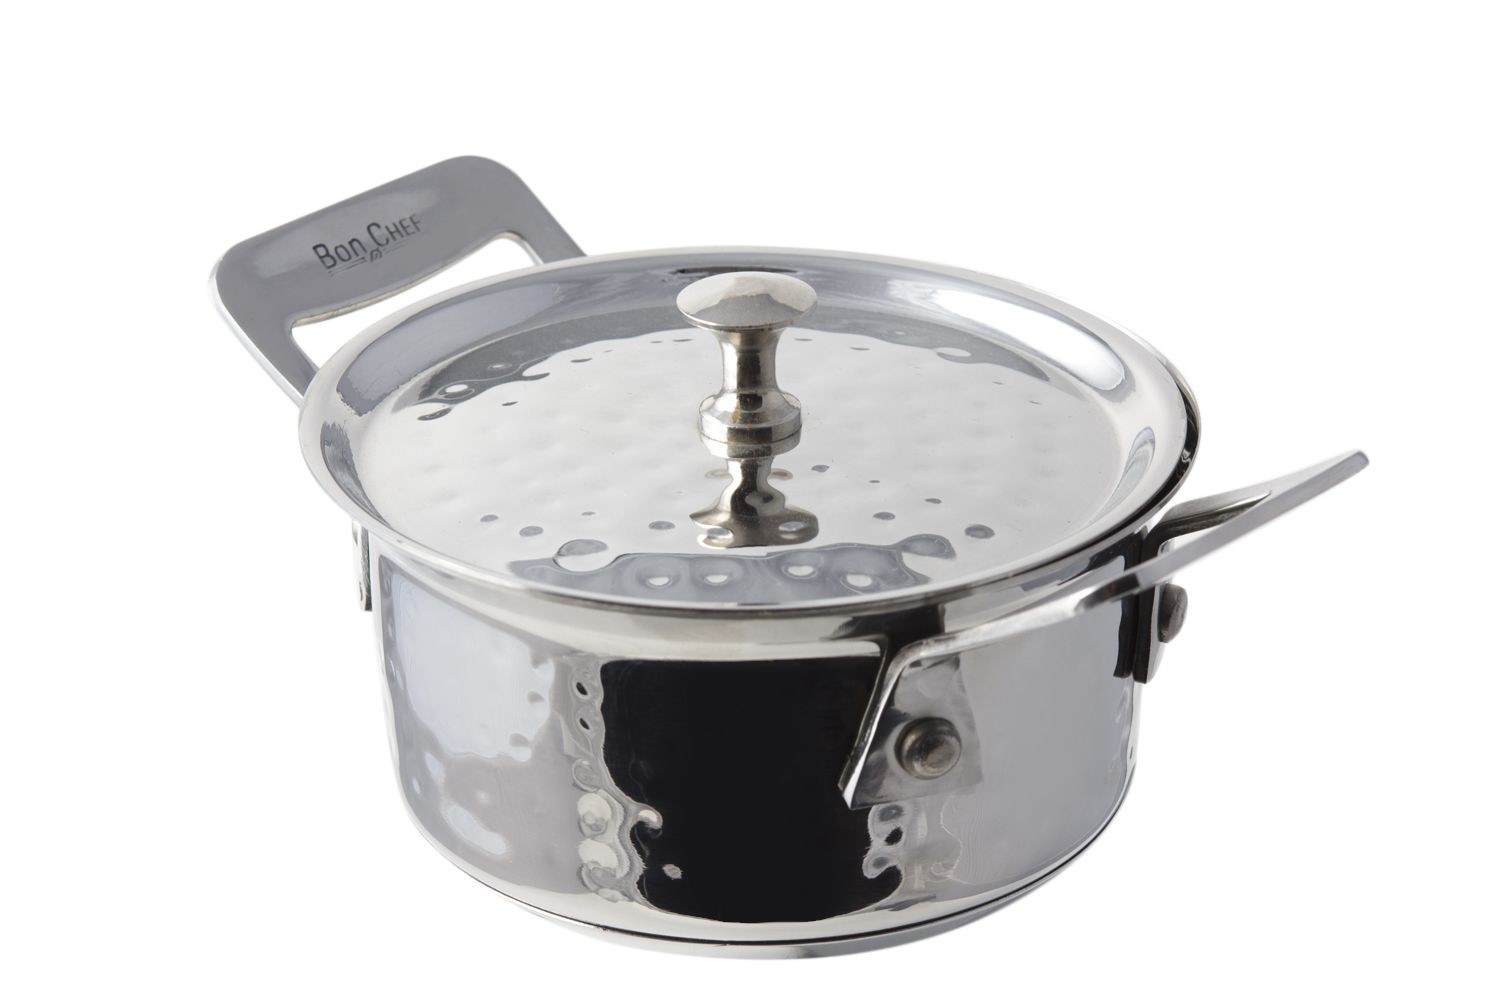 Bon Chef 60021HF Cucina Stainless Steel Round Side Dish with Lid, Hammered Finish, 11 oz.